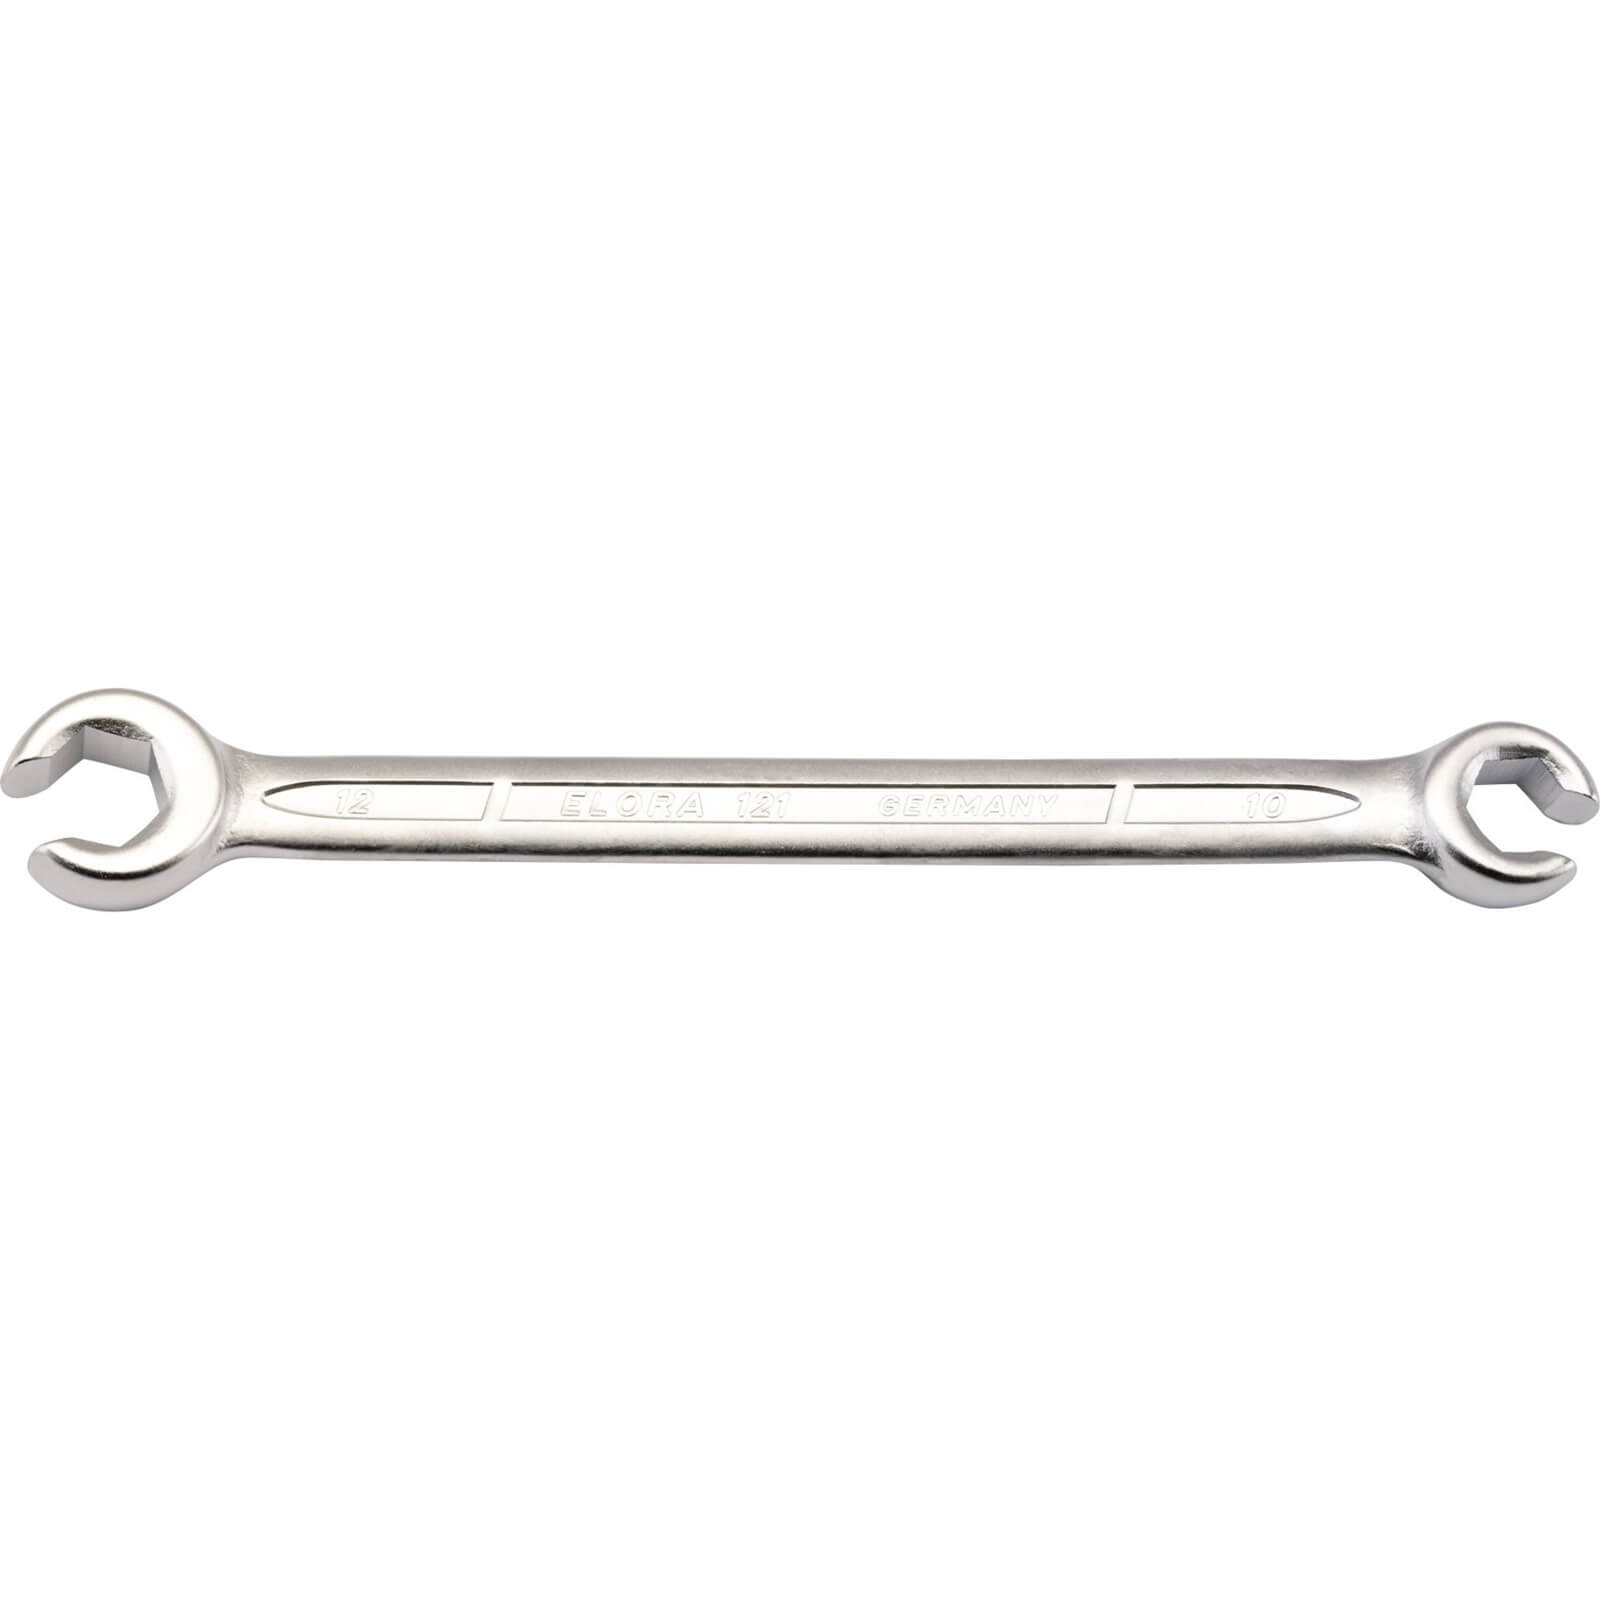 Image of Elora Flare Nut Spanner 10mm x 12mm